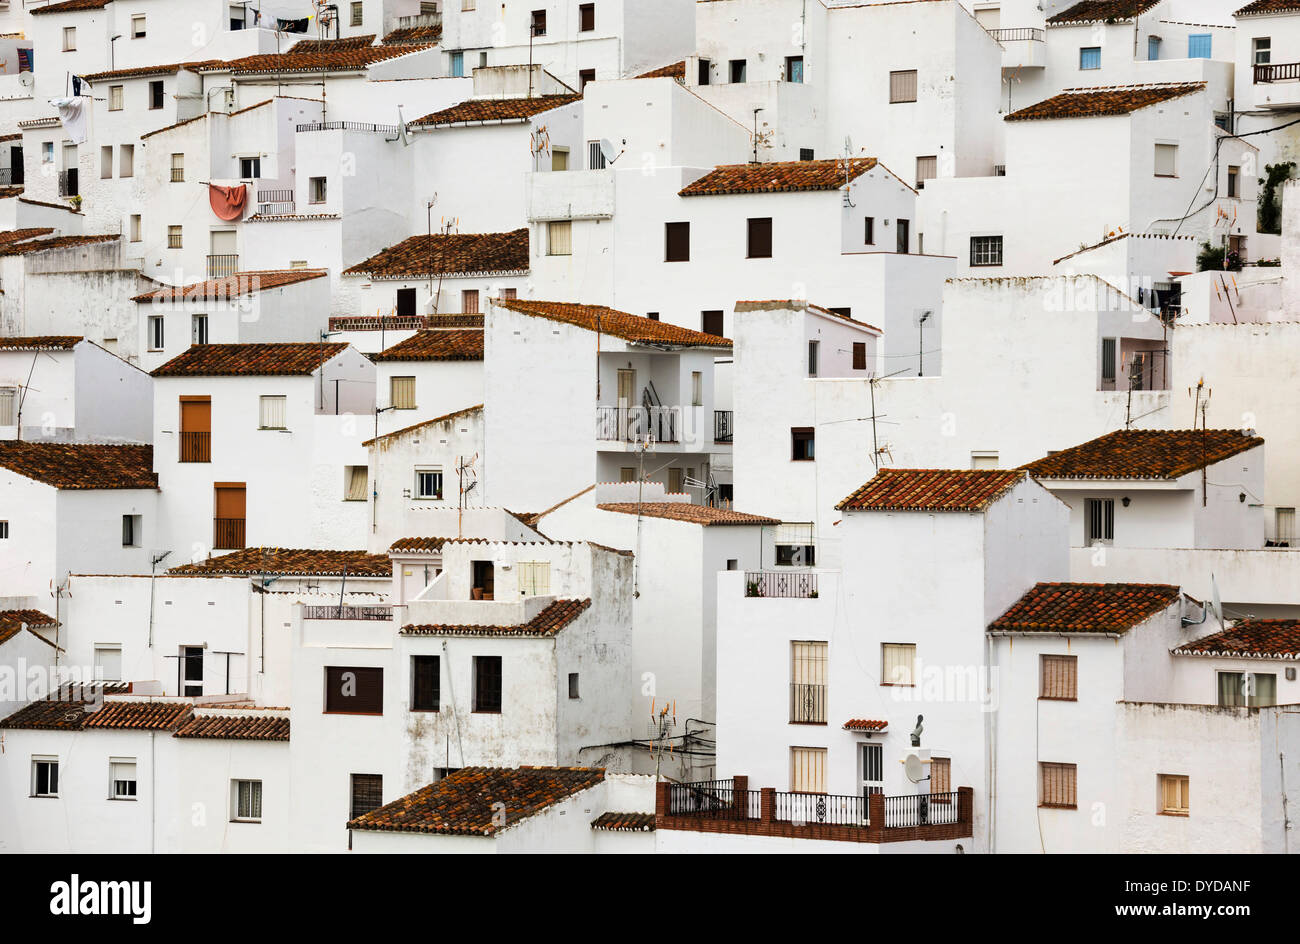 The White Town of Casares clings to a steep hillside, Málaga province, Andalusia, Spain Stock Photo